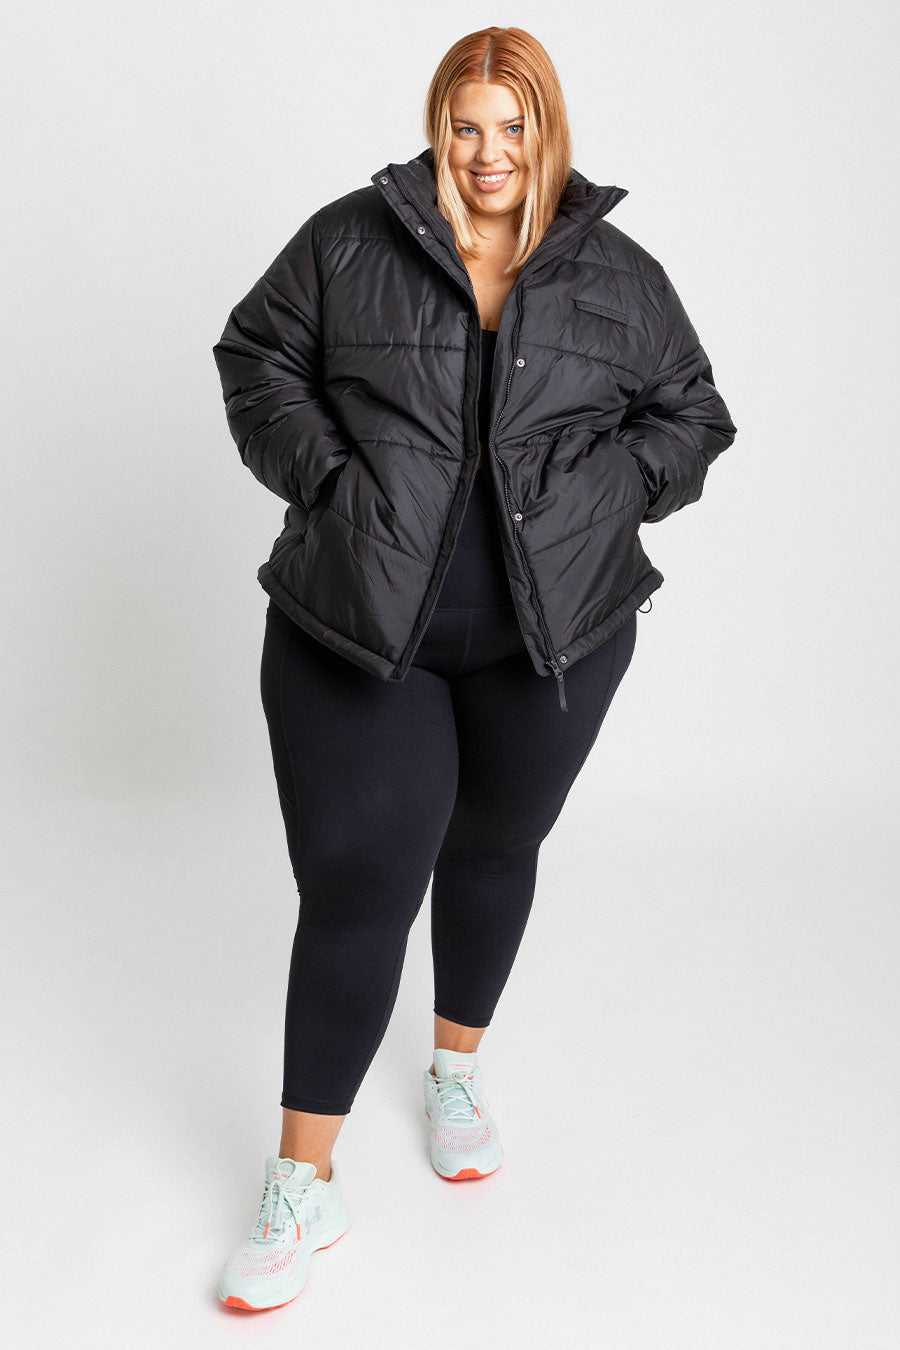 Lifestyle Puffa Jacket - Black from Active Truth™
